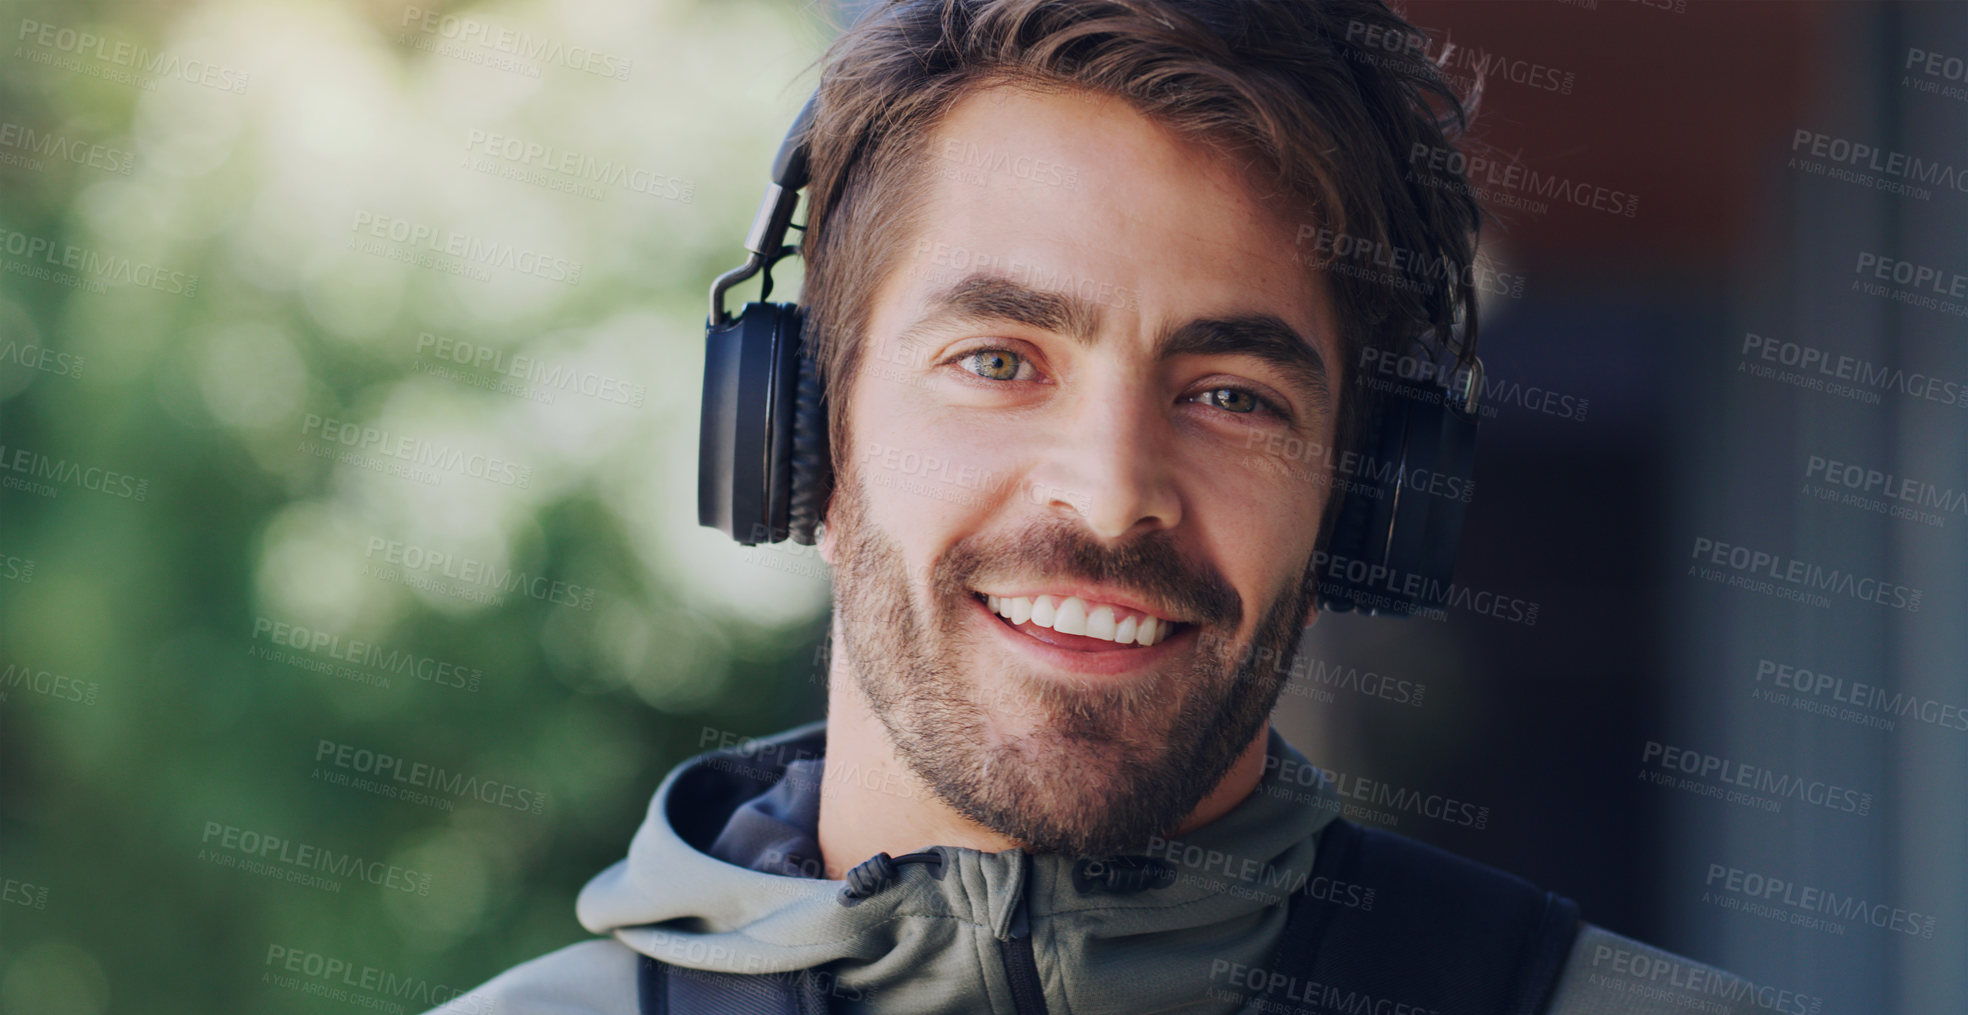 Buy stock photo Cropped shot of a young man wearing headphone while walking through the city